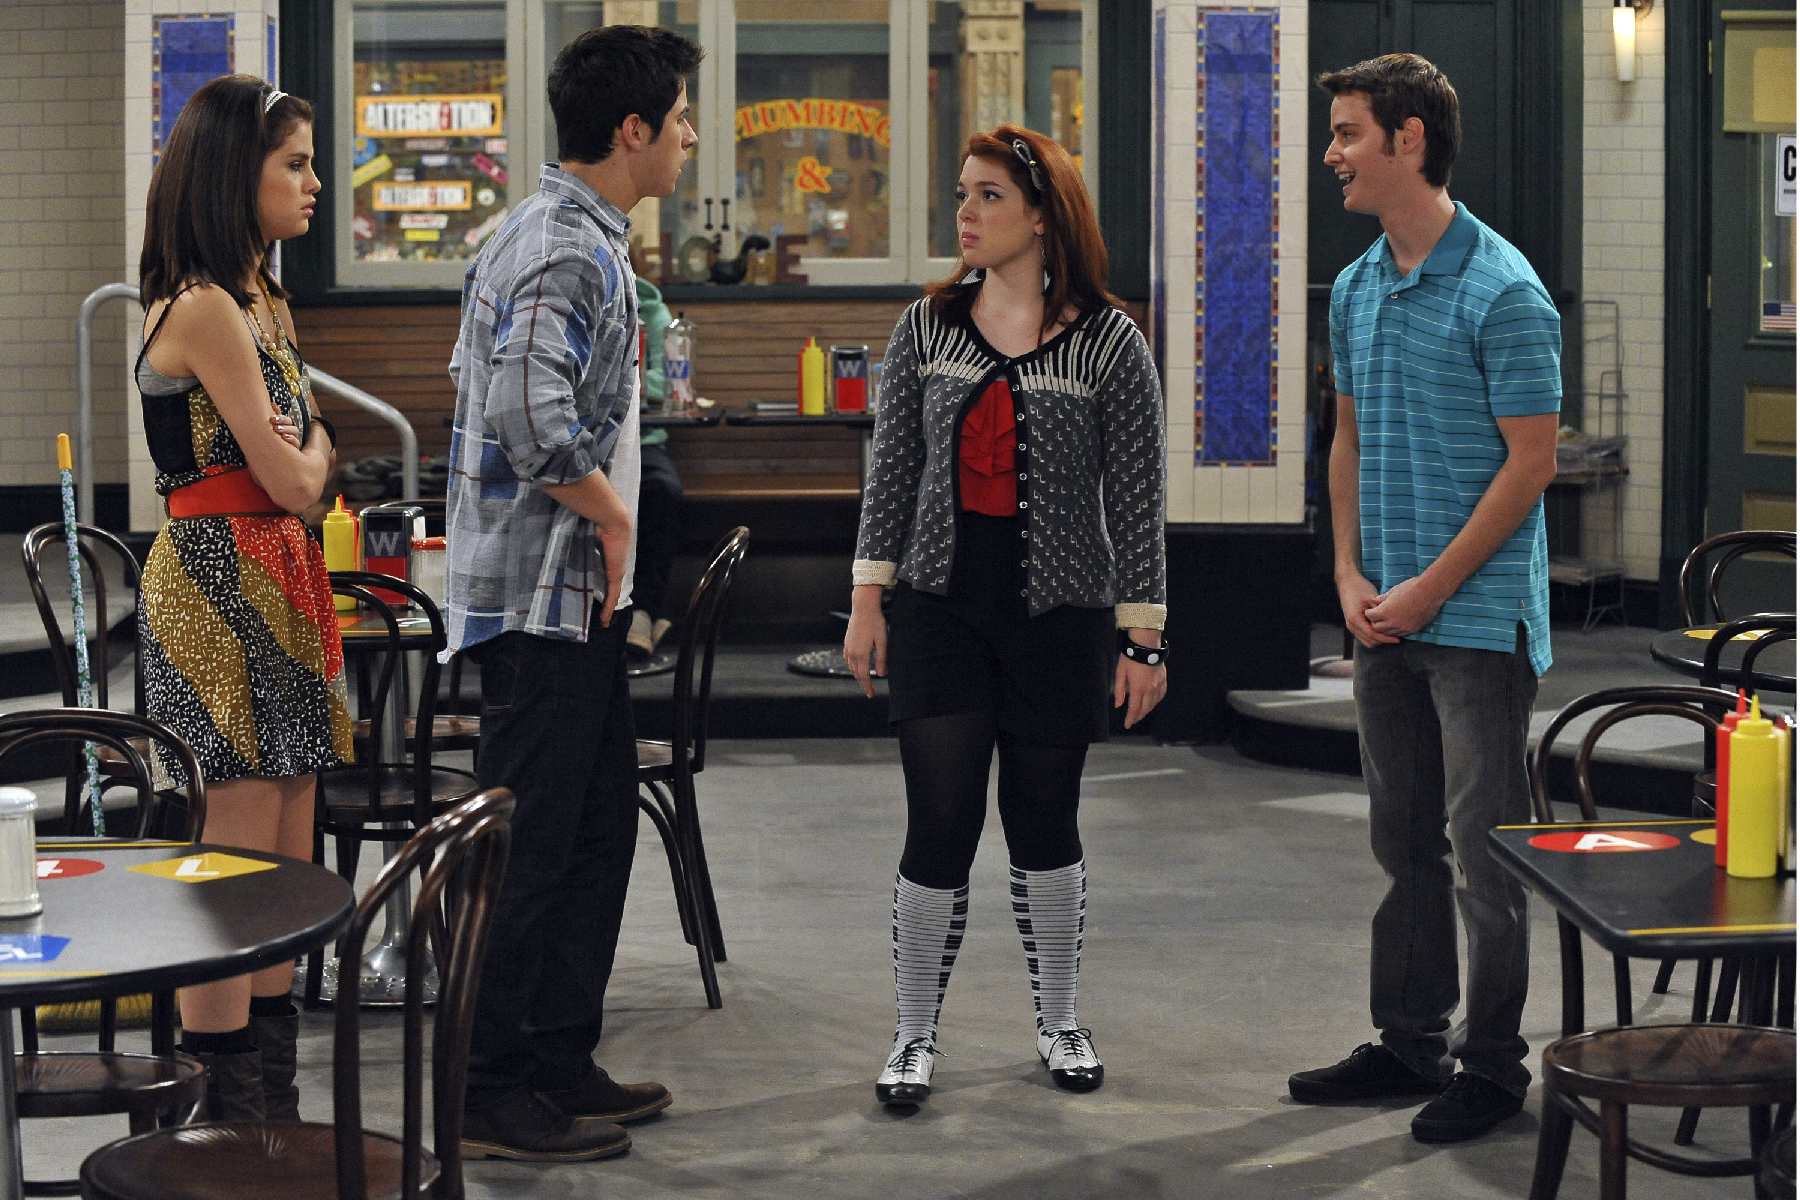 Selena Gomez in Wizards of Waverly Place (Season 4). Selena Gomez in Wizard...